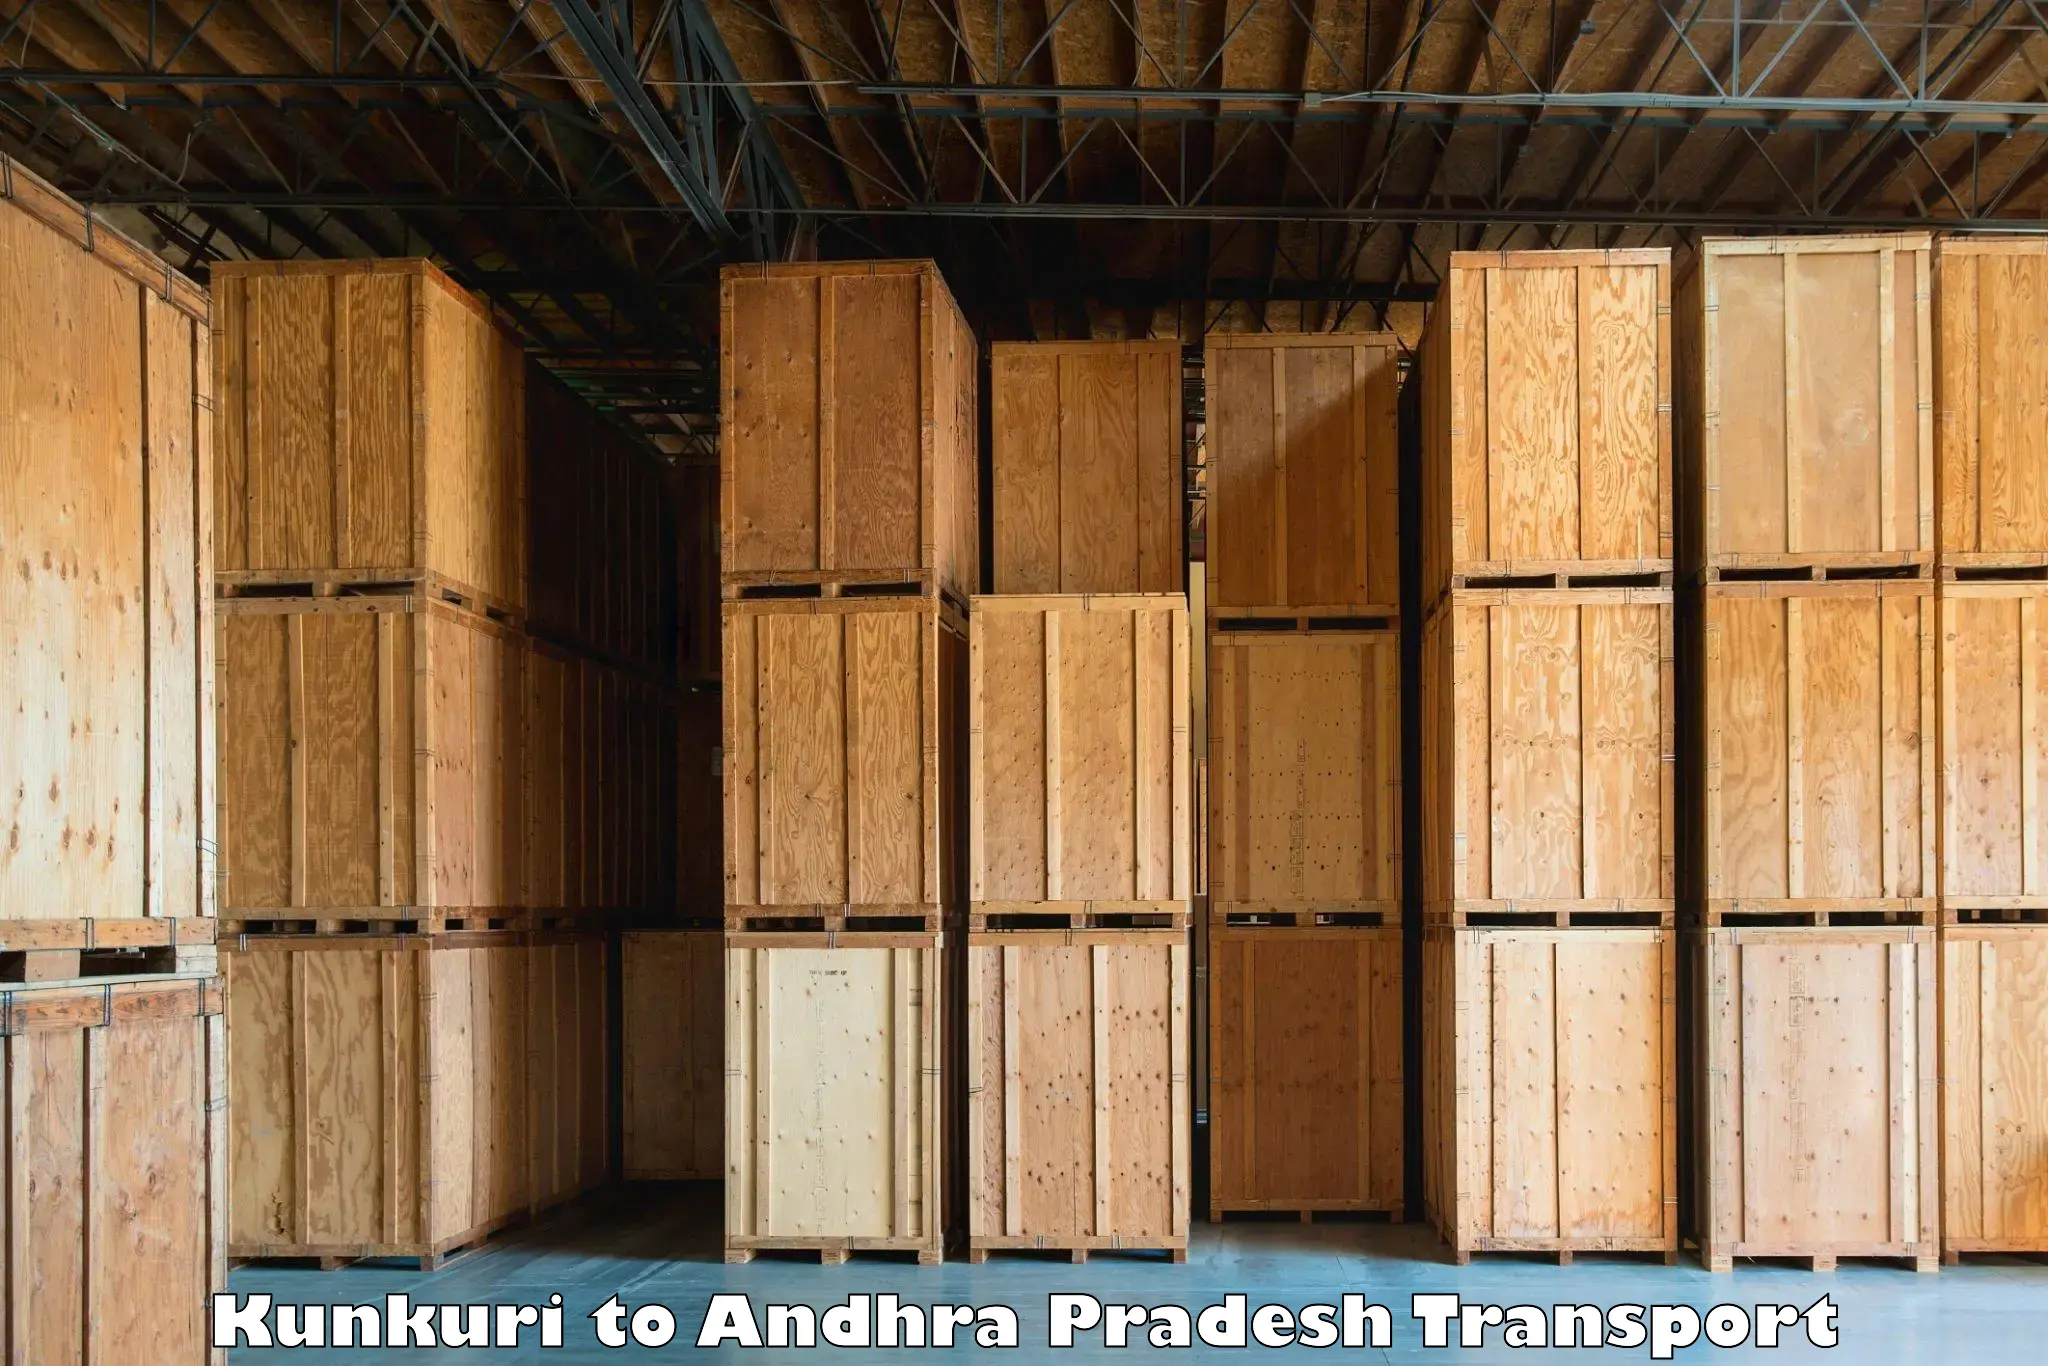 Package delivery services in Kunkuri to Tirupati